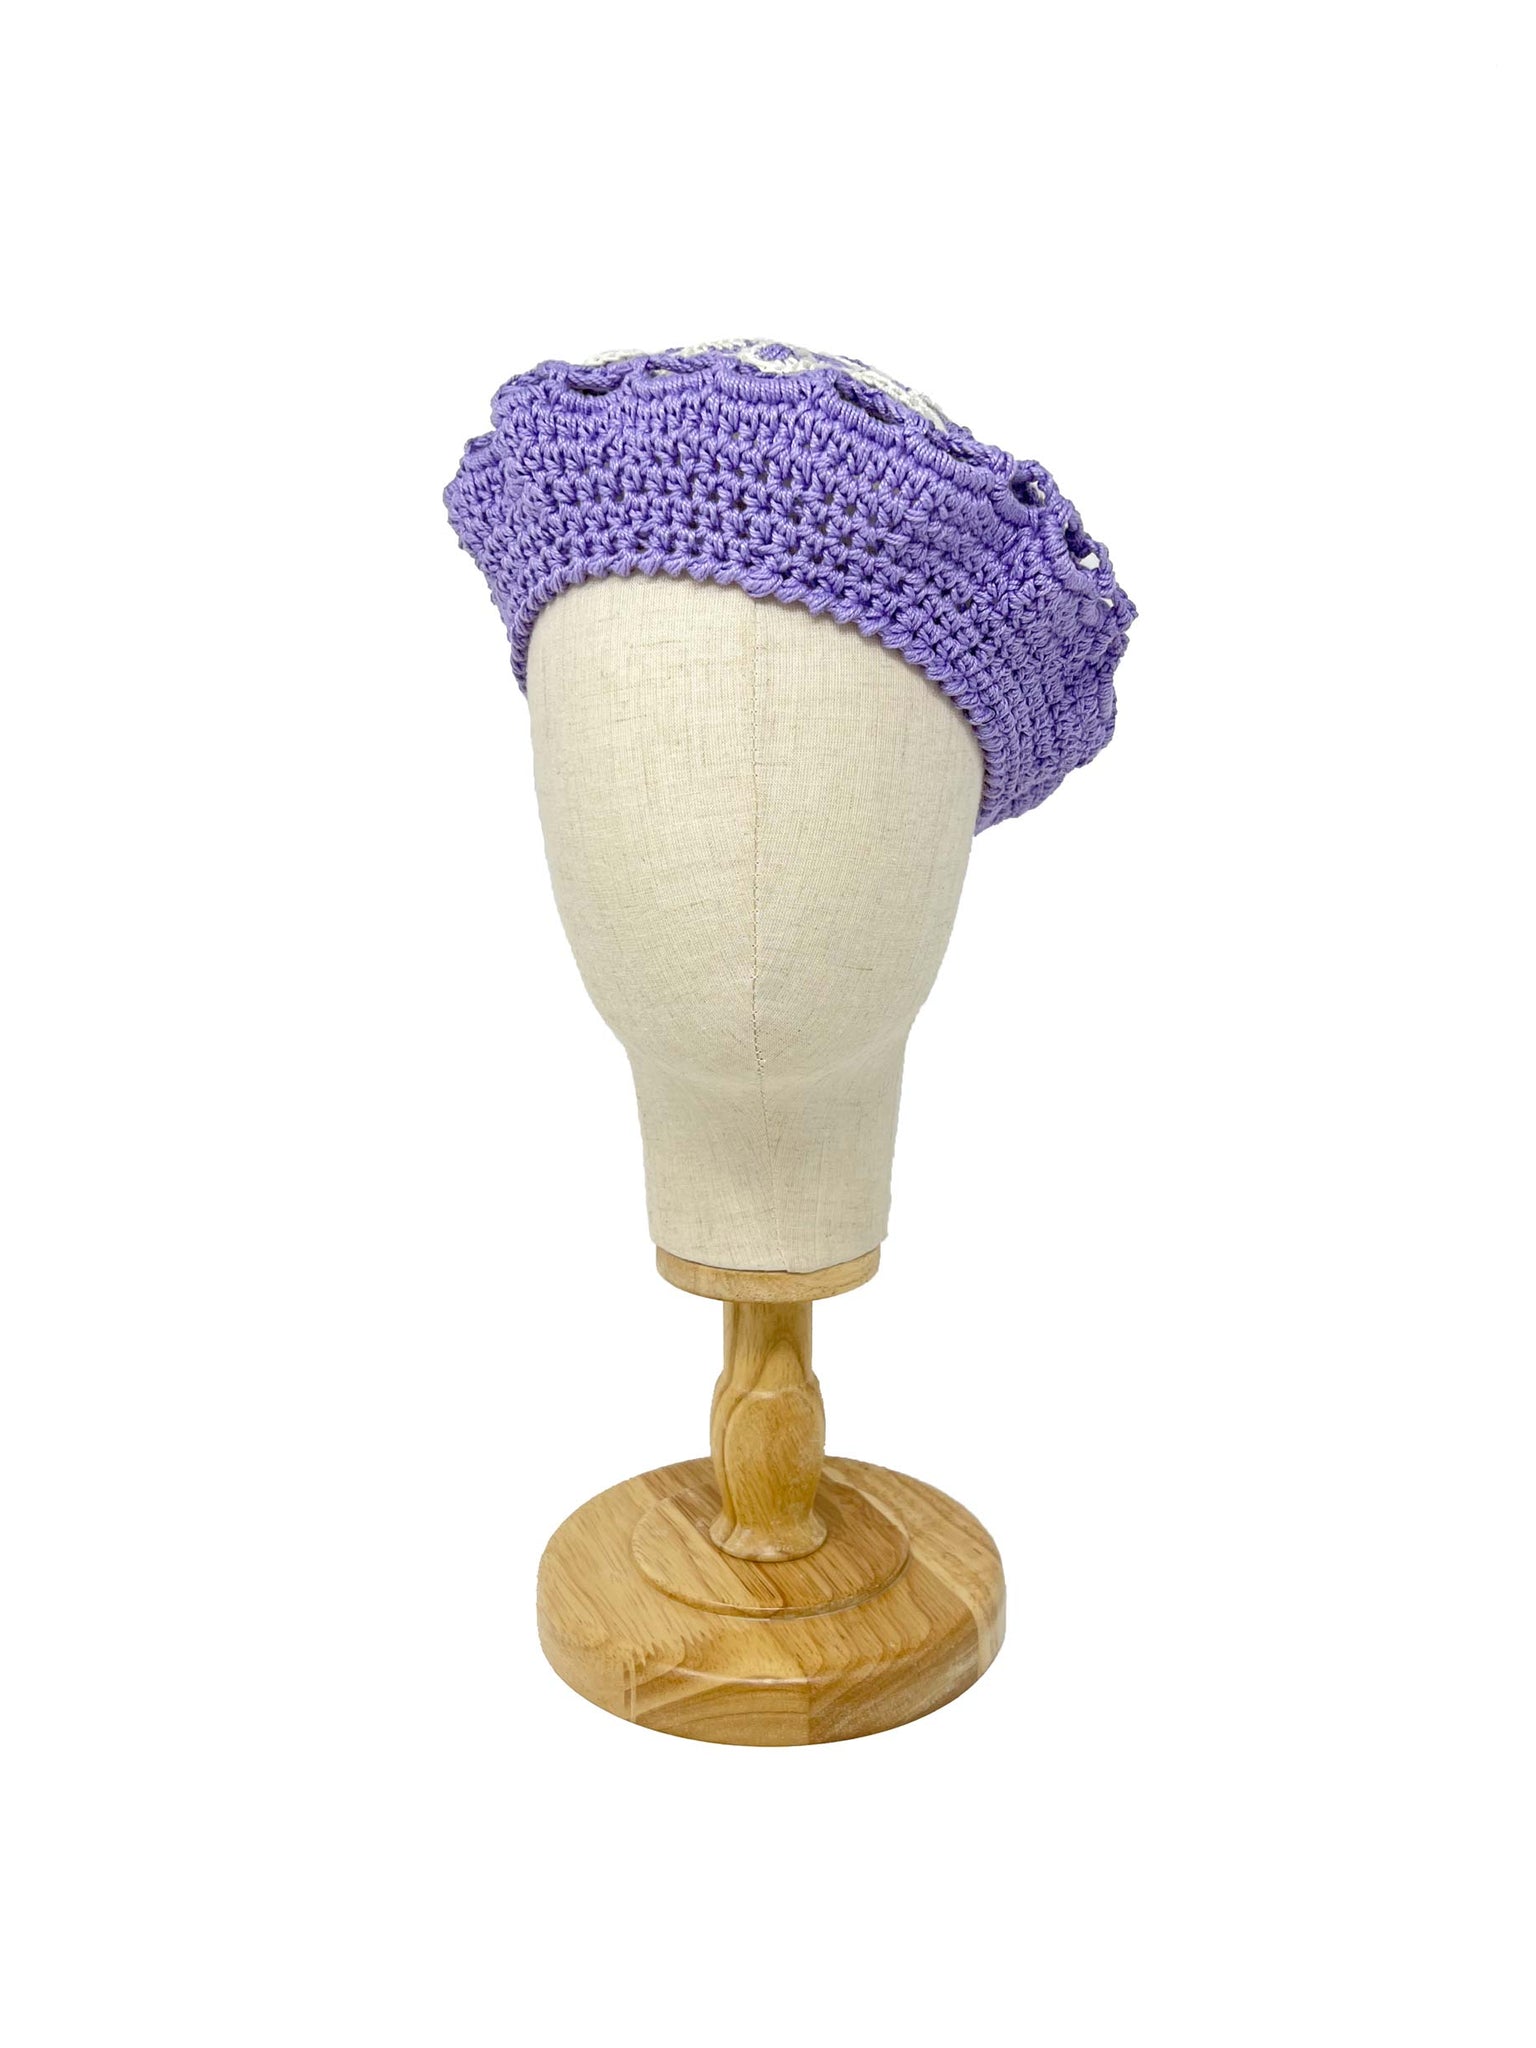 Lilac crocheted beret with crocheted flowers